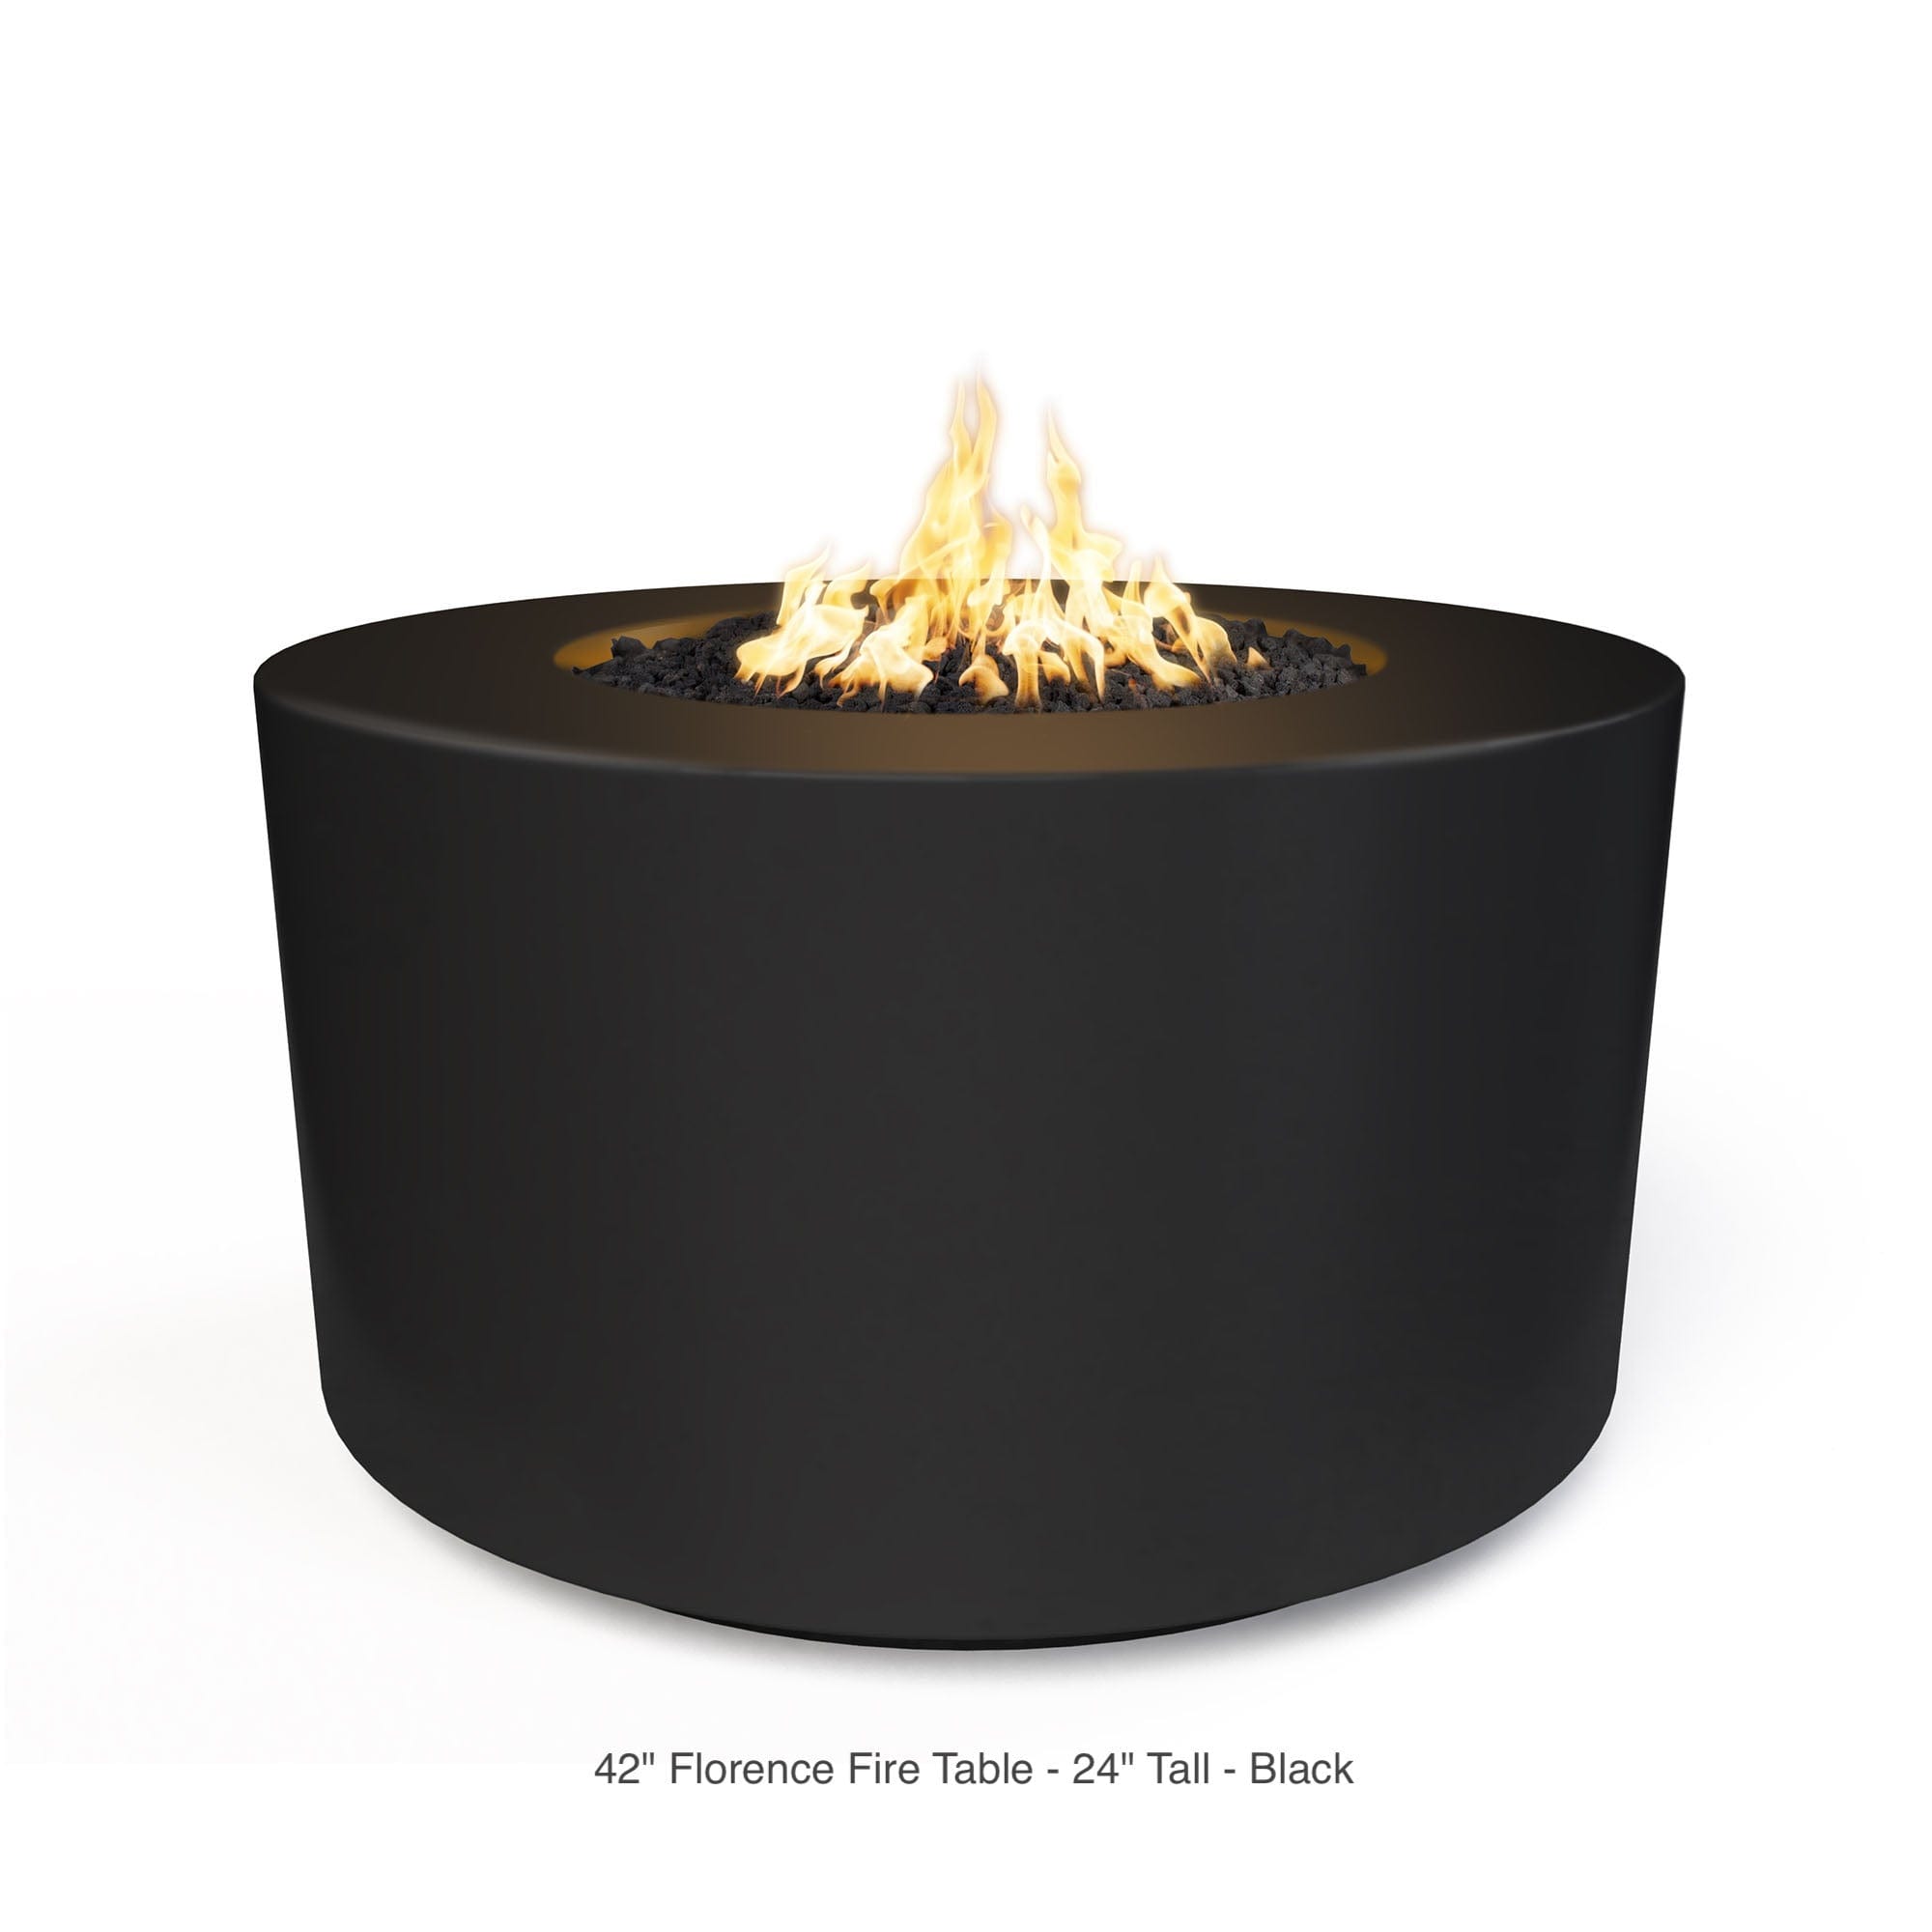 The Outdoor Plus Fire Features The Outdoor Plus 42" Round Florence GFRC Concrete Fire Pit - 24" Tall / OPT-FL4224, OPT-FL4224FSML, OPT-FL4224FSEN, OPT-FL4224E12V, OPT-FL4224EKIT